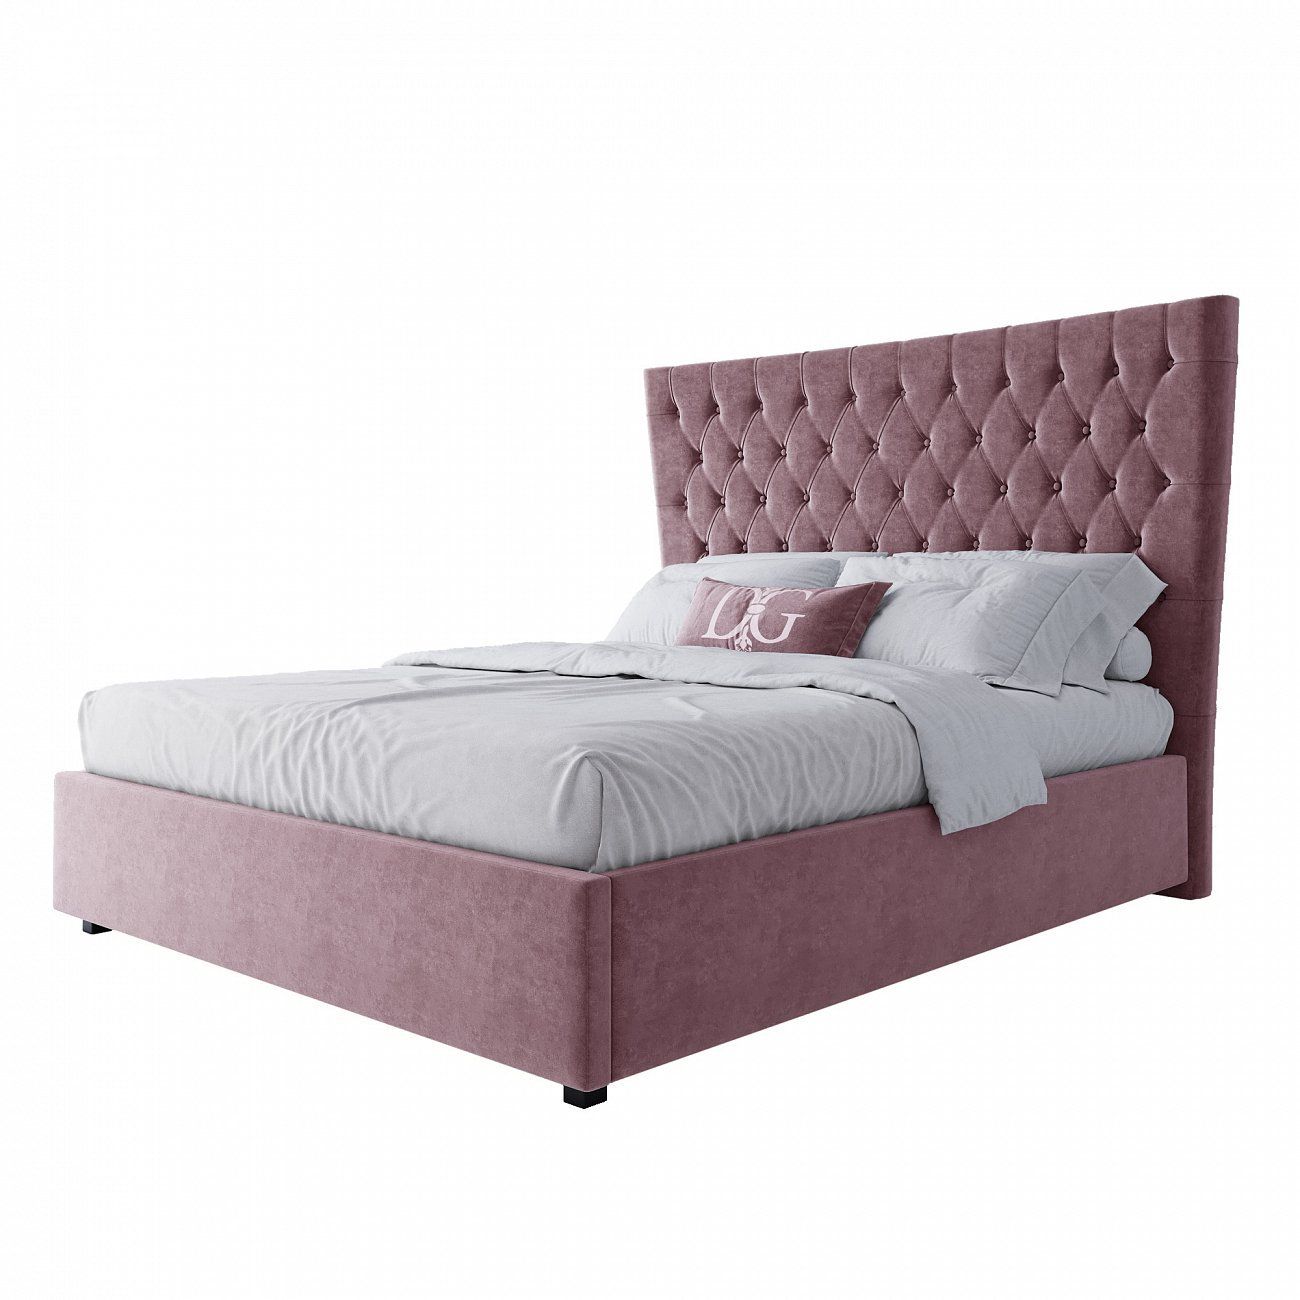 Double bed 160x200 dusty rose made of velour QuickSand